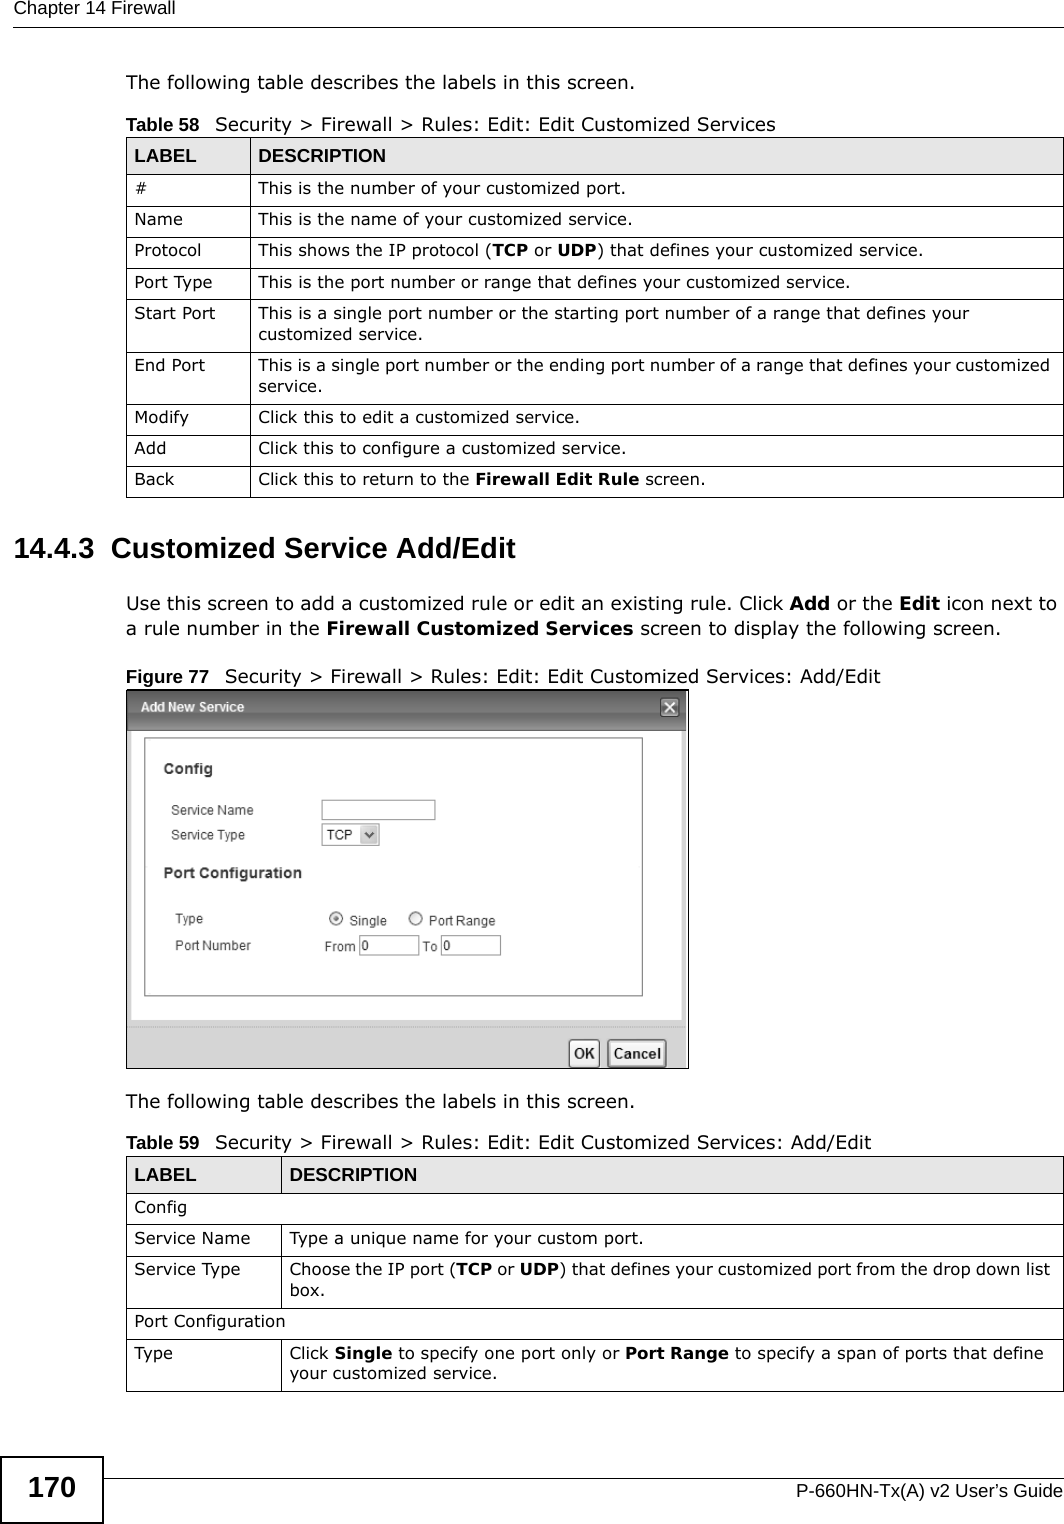 Chapter 14 FirewallP-660HN-Tx(A) v2 User’s Guide170The following table describes the labels in this screen.  14.4.3  Customized Service Add/Edit Use this screen to add a customized rule or edit an existing rule. Click Add or the Edit icon next to a rule number in the Firewall Customized Services screen to display the following screen.Figure 77   Security &gt; Firewall &gt; Rules: Edit: Edit Customized Services: Add/EditThe following table describes the labels in this screen.Table 58   Security &gt; Firewall &gt; Rules: Edit: Edit Customized ServicesLABEL DESCRIPTION#This is the number of your customized port. Name This is the name of your customized service.Protocol This shows the IP protocol (TCP or UDP) that defines your customized service.Port Type This is the port number or range that defines your customized service.Start Port This is a single port number or the starting port number of a range that defines your customized service.End Port This is a single port number or the ending port number of a range that defines your customized service.Modify Click this to edit a customized service.Add Click this to configure a customized service.Back Click this to return to the Firewall Edit Rule screen.Table 59   Security &gt; Firewall &gt; Rules: Edit: Edit Customized Services: Add/EditLABEL DESCRIPTIONConfigService Name Type a unique name for your custom port.Service Type Choose the IP port (TCP or UDP) that defines your customized port from the drop down list box.Port ConfigurationType Click Single to specify one port only or Port Range to specify a span of ports that define your customized service. 